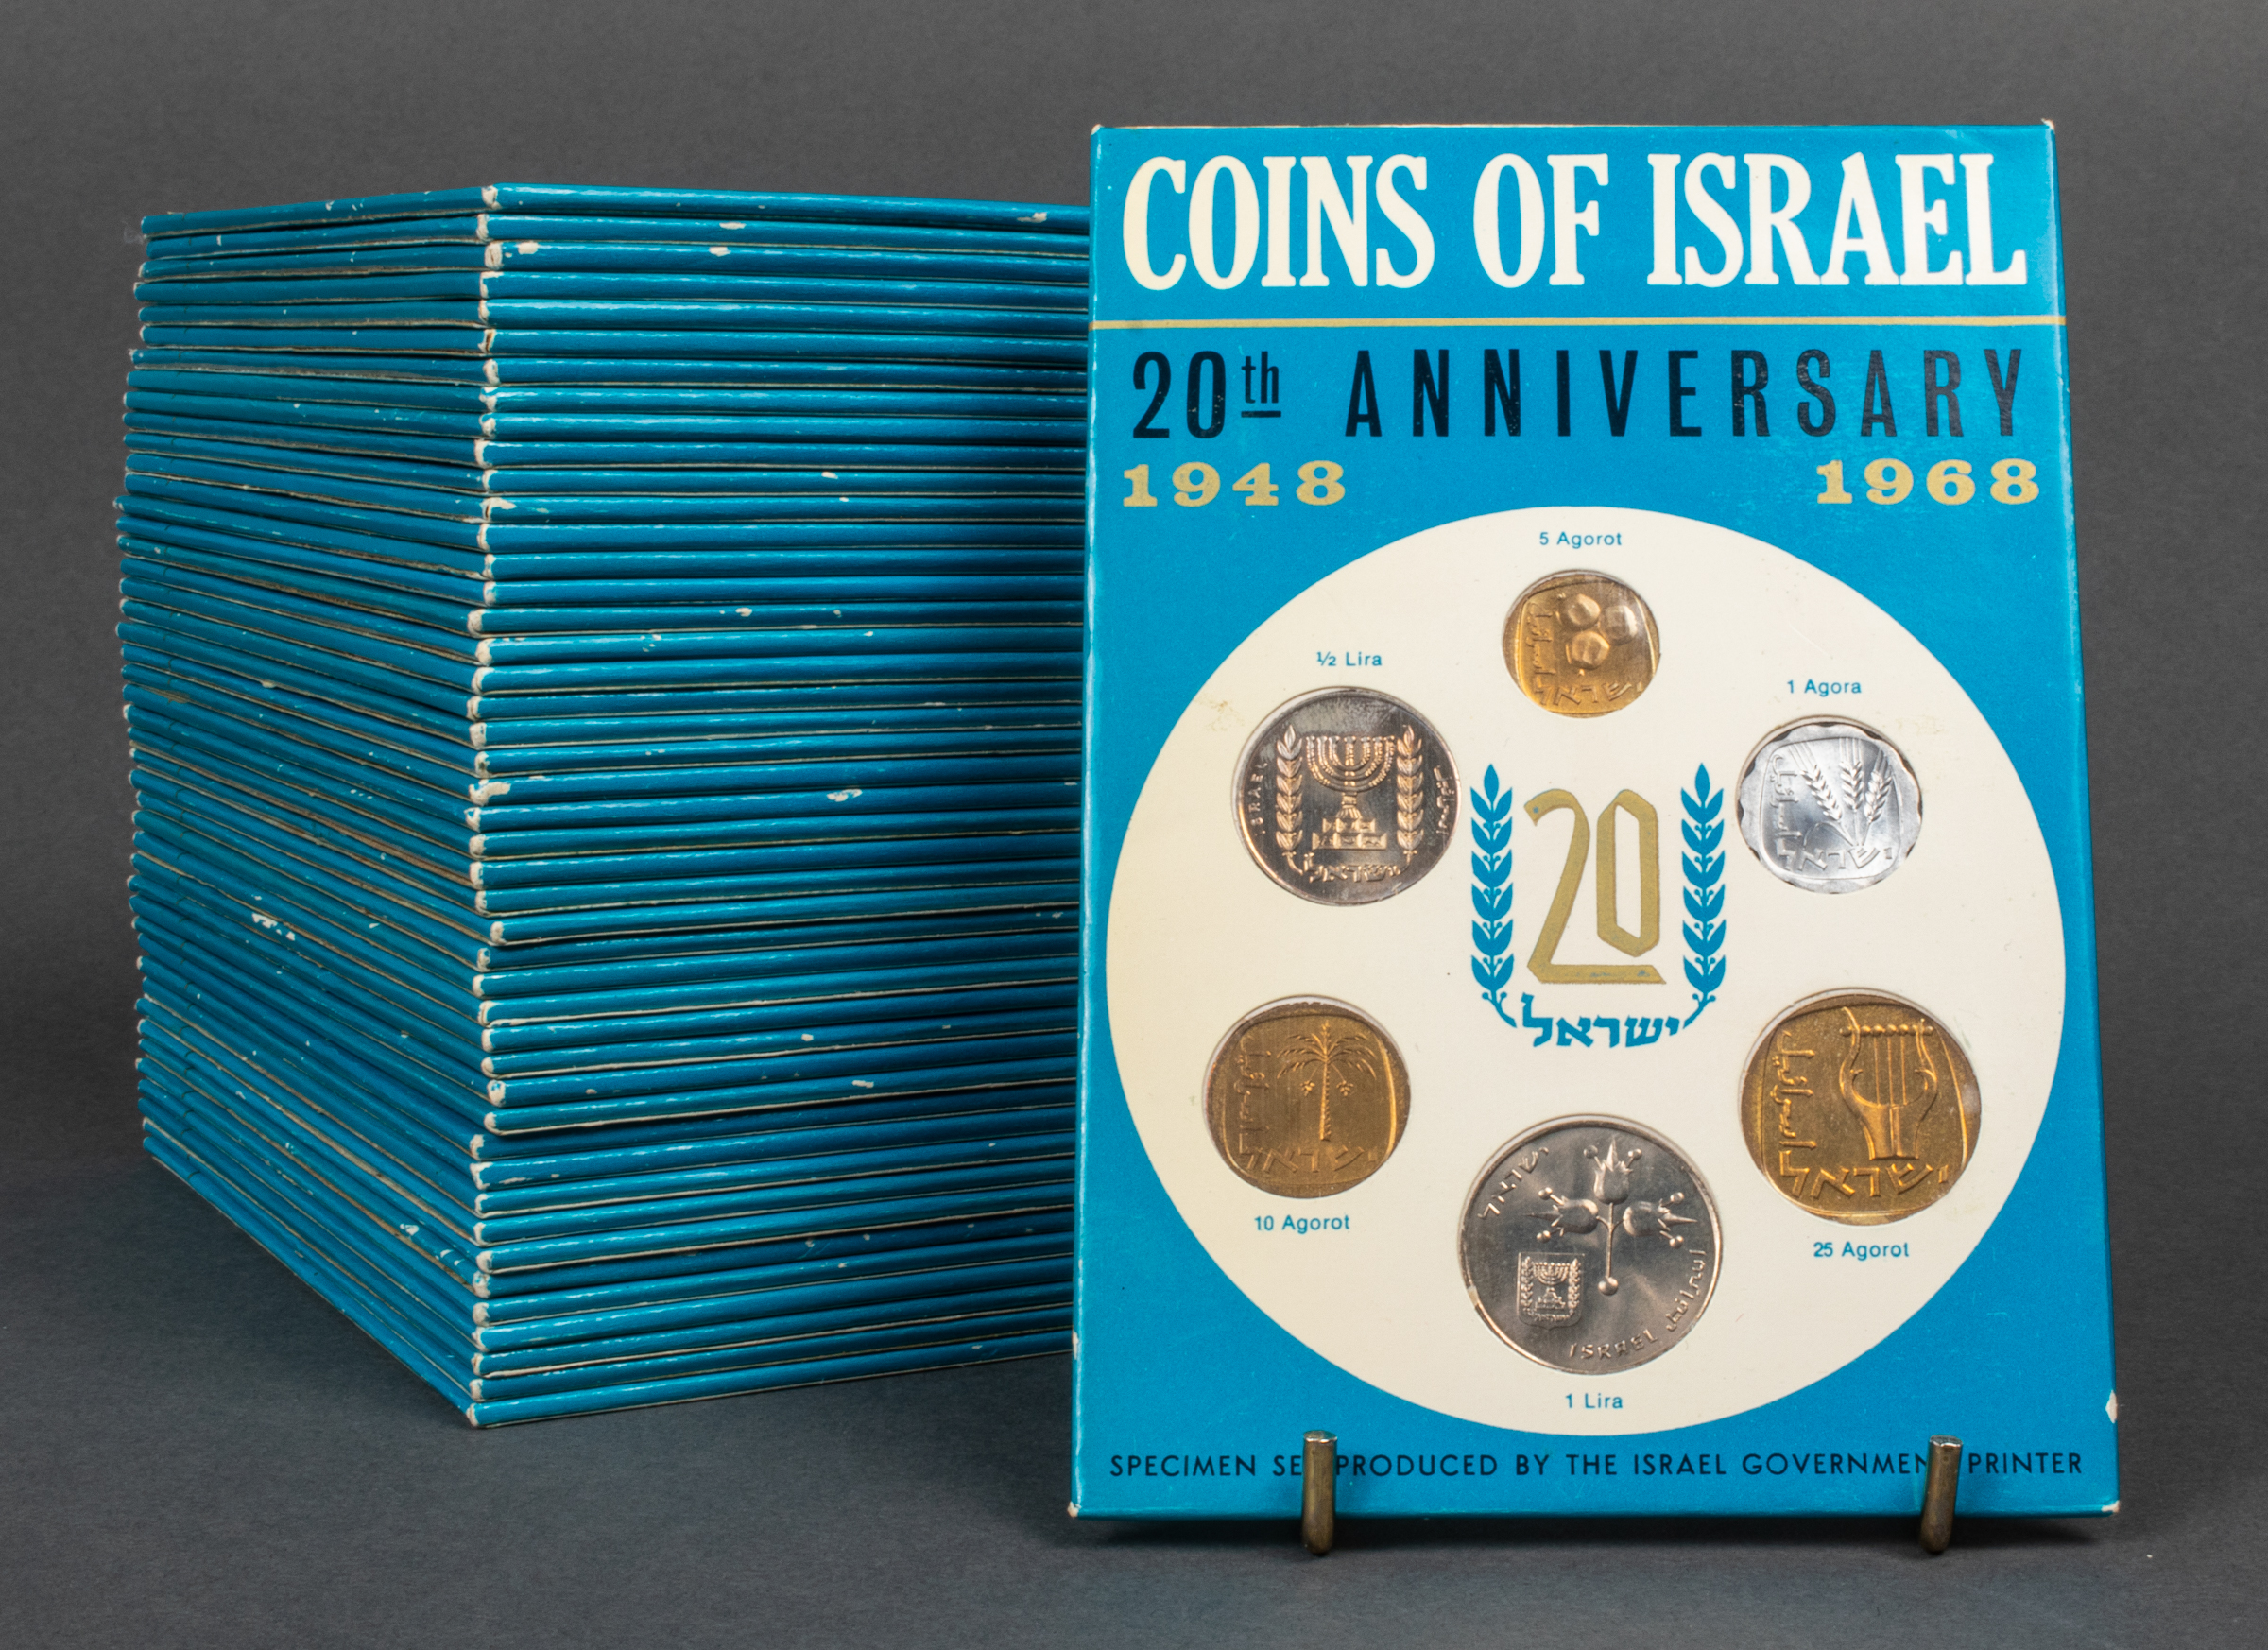 COINS OF ISRAEL 20TH ANNIVERSARY